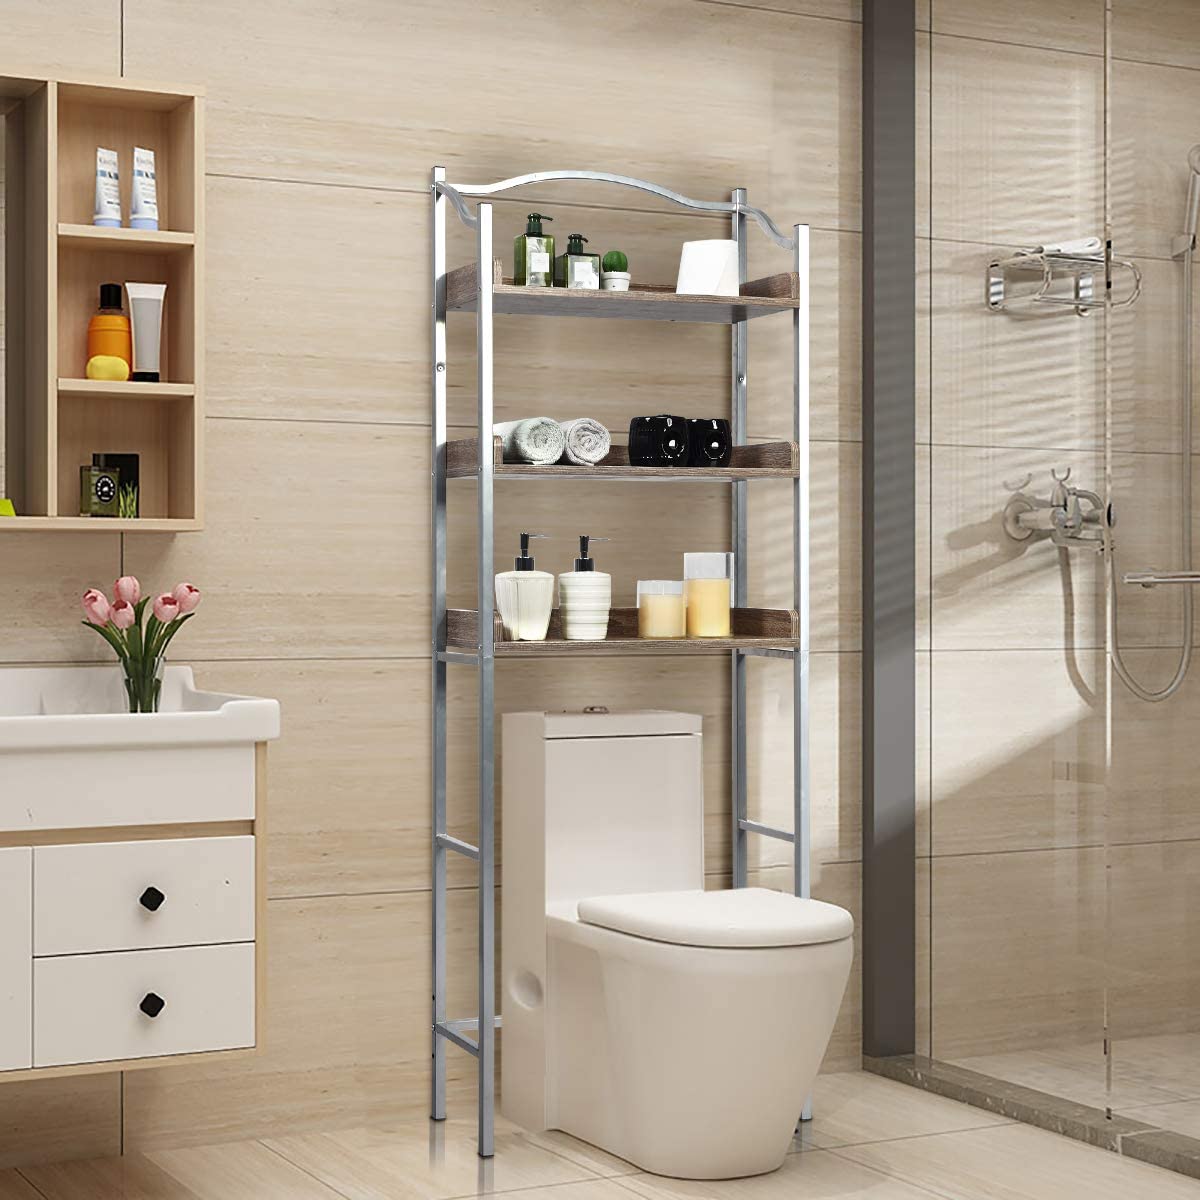 Over-The-Toilet Spacesaver 3-Tier W/Adjustable Shelves and Sturdy Metal Frame